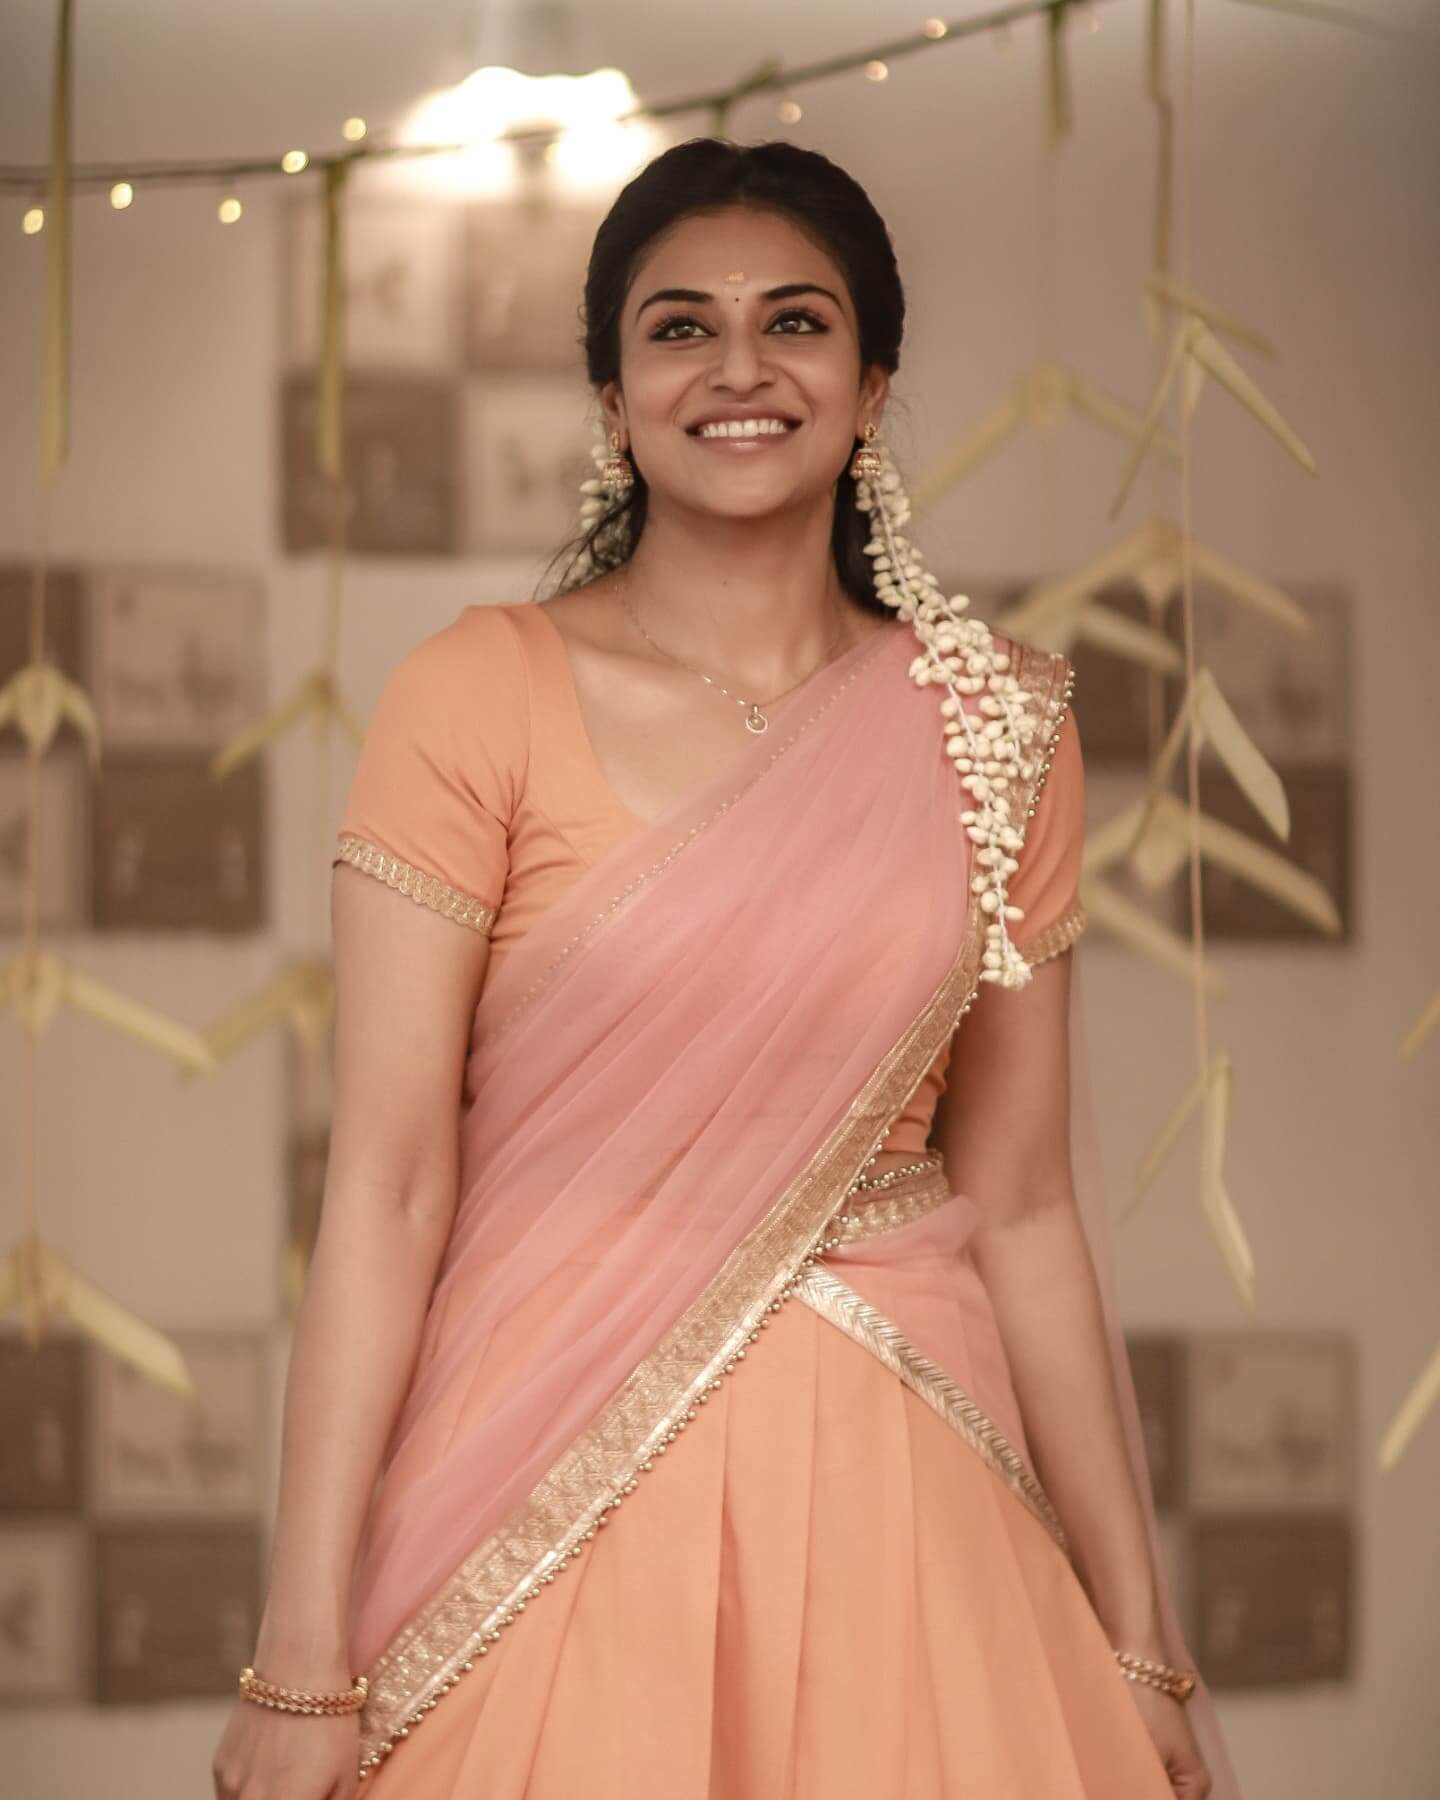 Indhuja Look Classy In Peach Lehenga Outfit